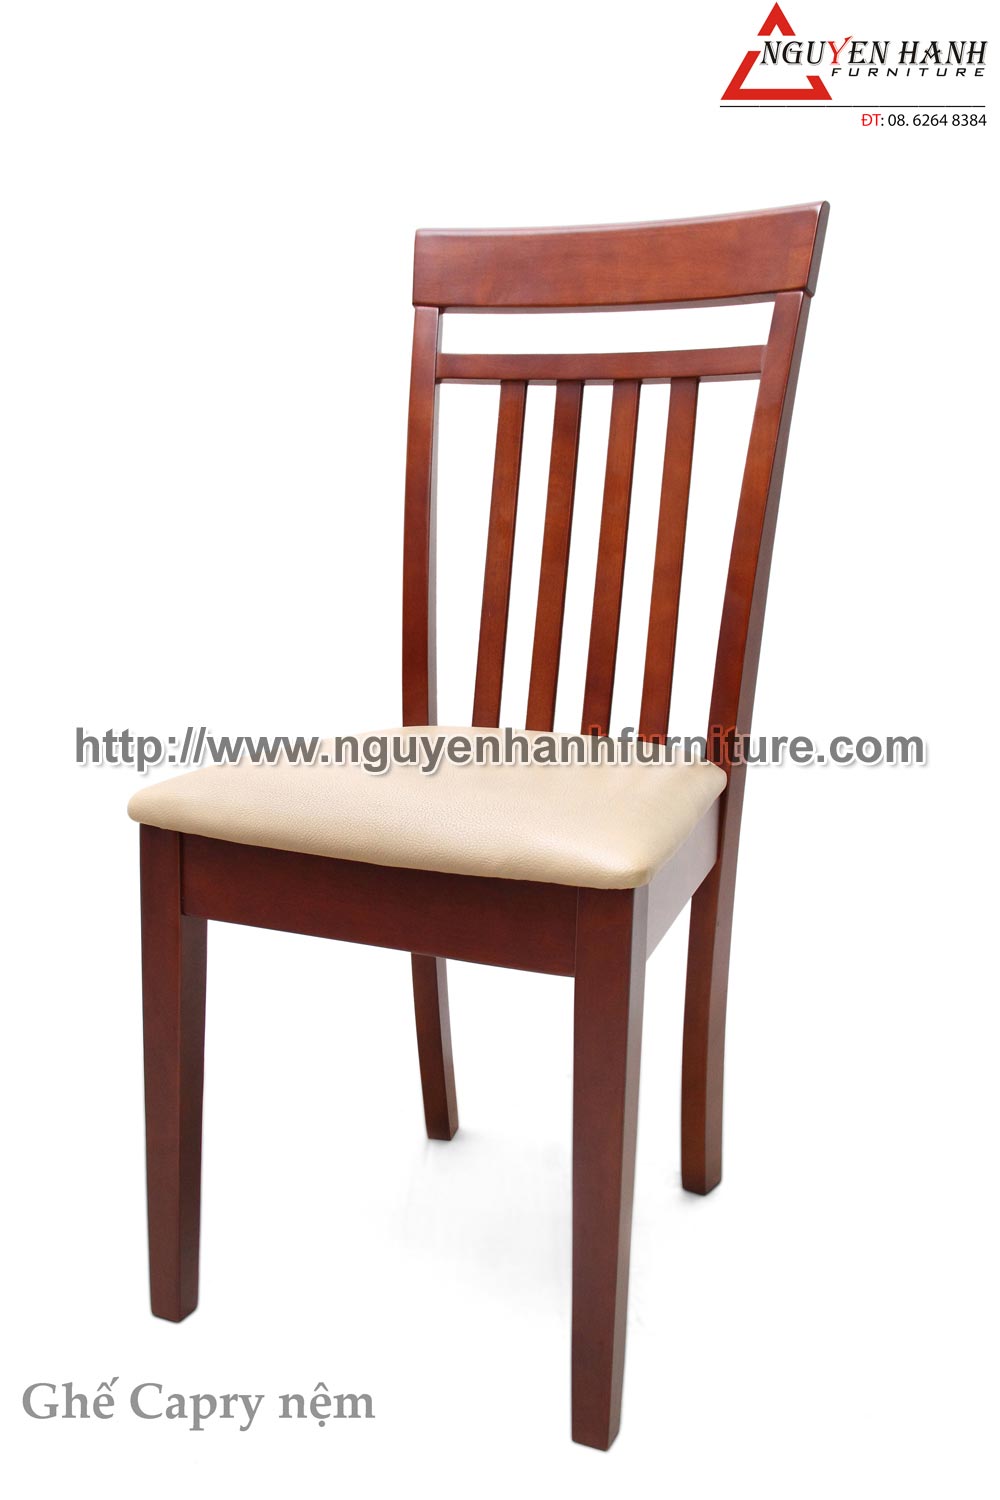 Name product: Capry chair 